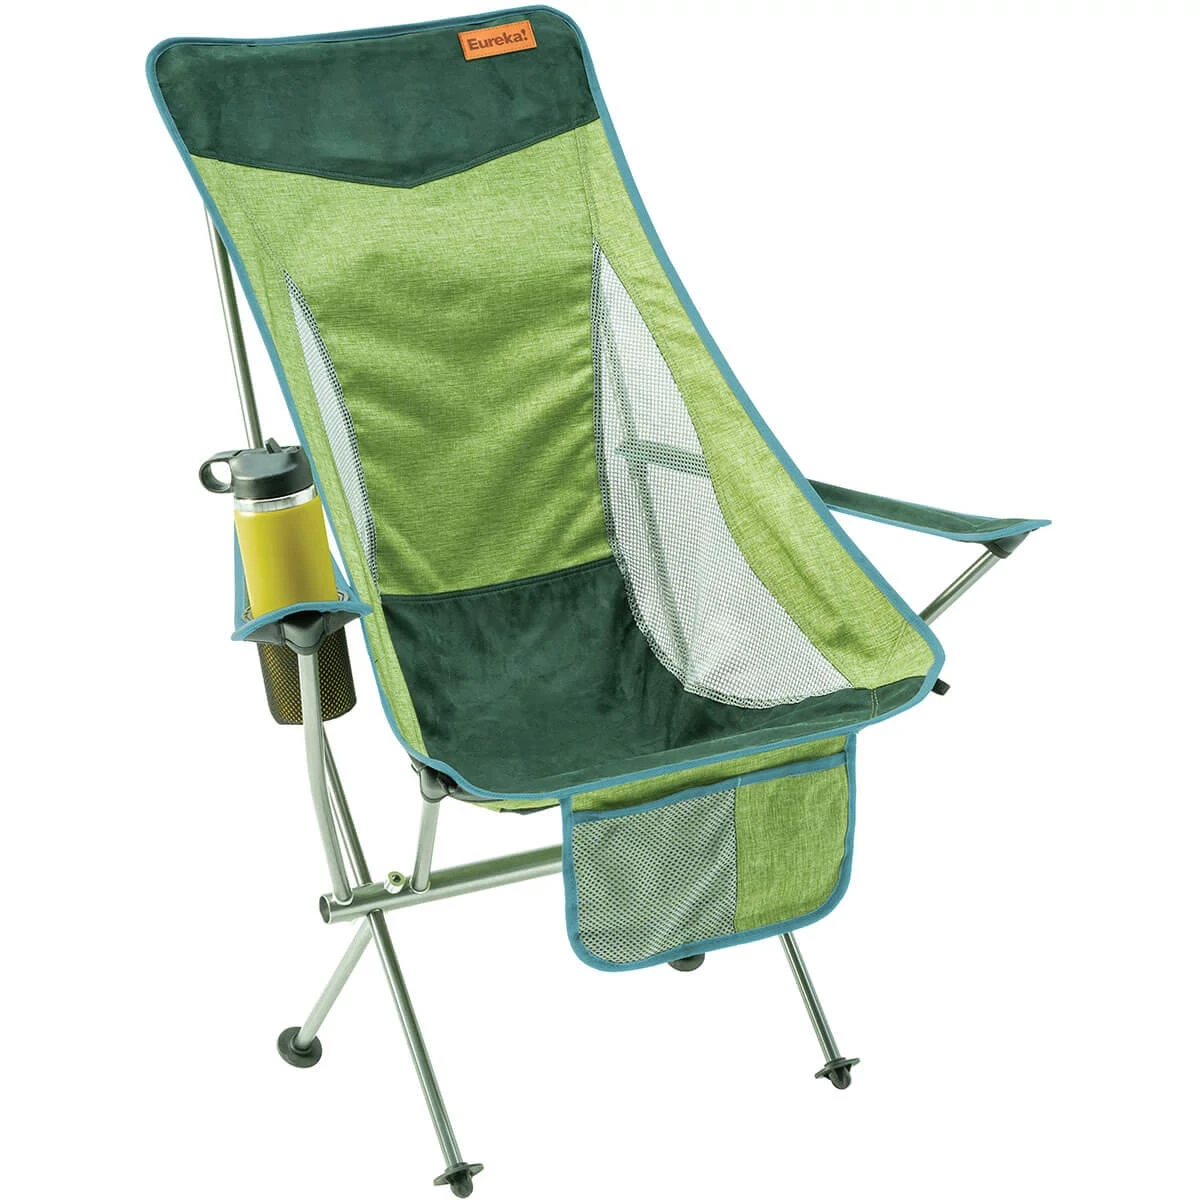 Eureka! Tagalong Highback Camp Chair with pack pocket out